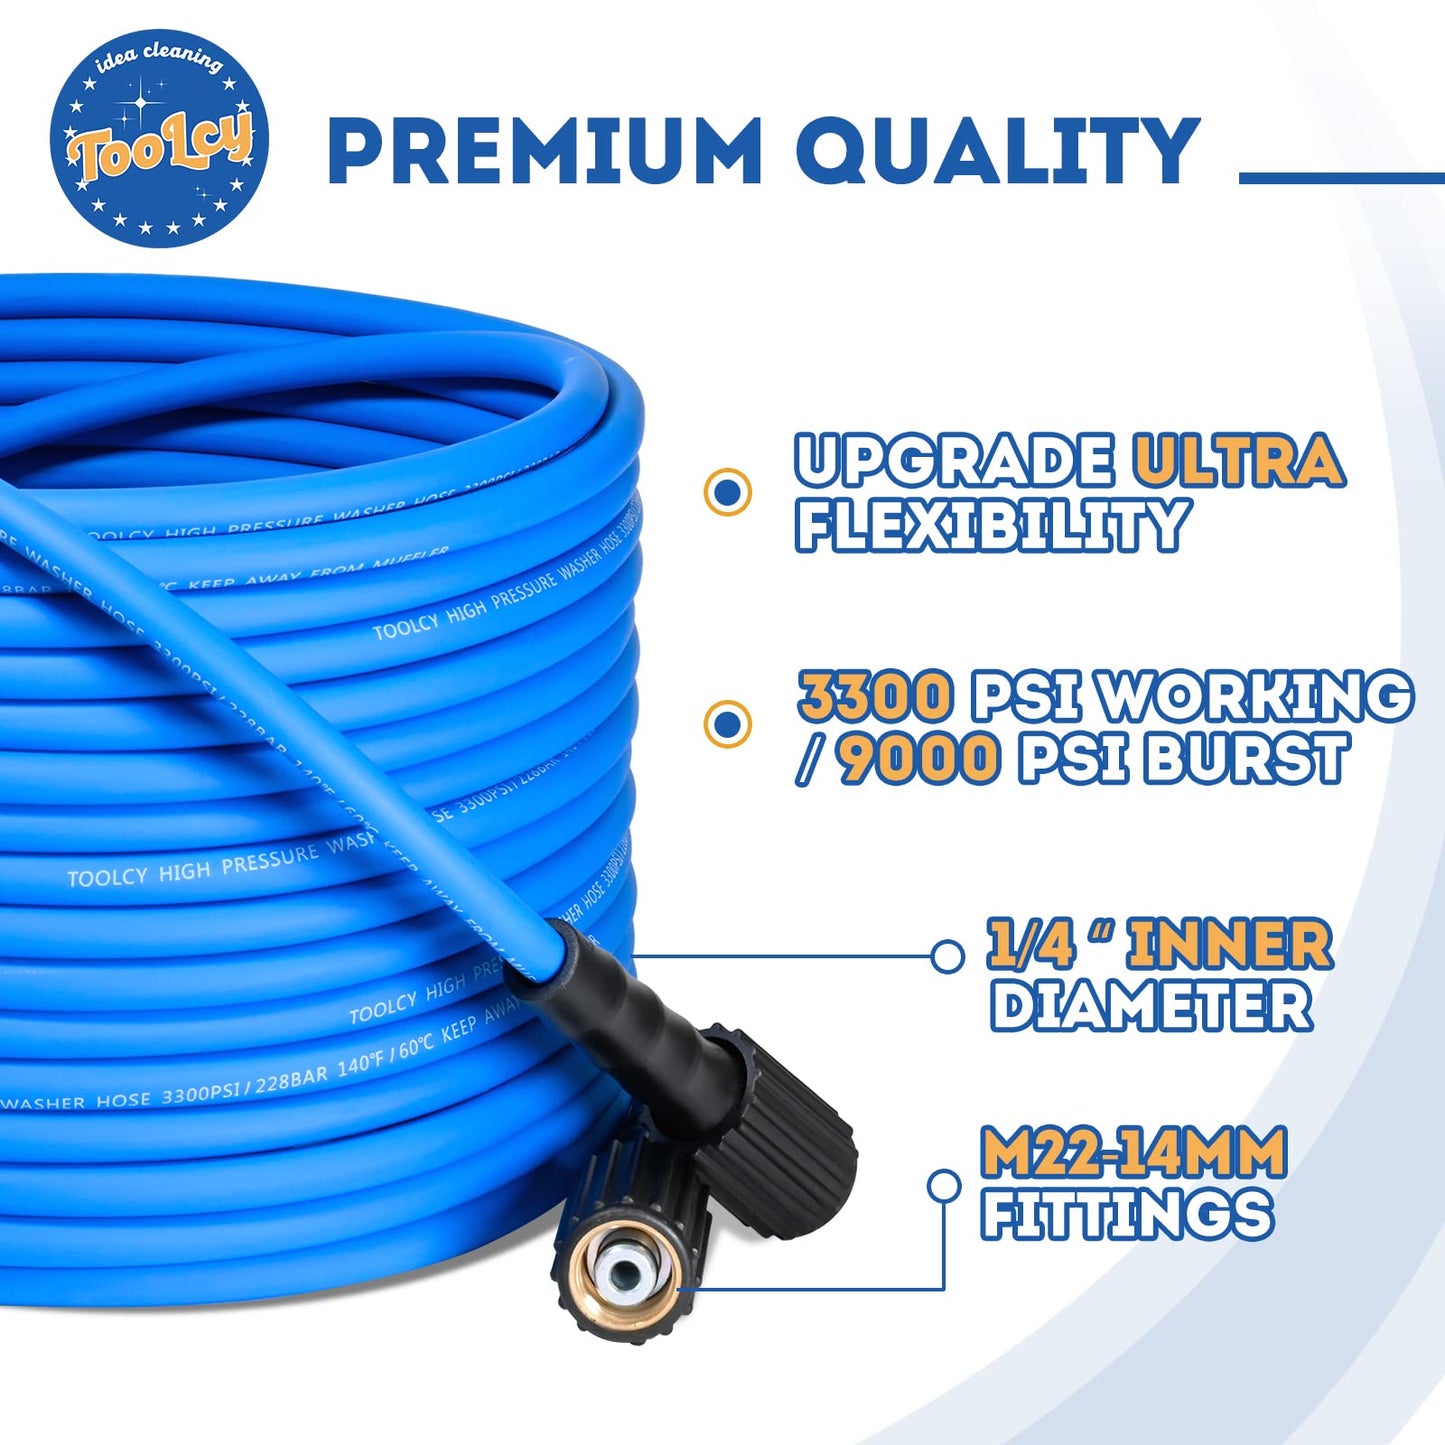 TOOLCY Pressure Washer Hose 50ft, 3300 PSI Kink Resistant Power Washer Hose 1/4 in., Replacement Power Wash Hose with M22 and 3/8" Quick Connection Kit for Gas & Electric